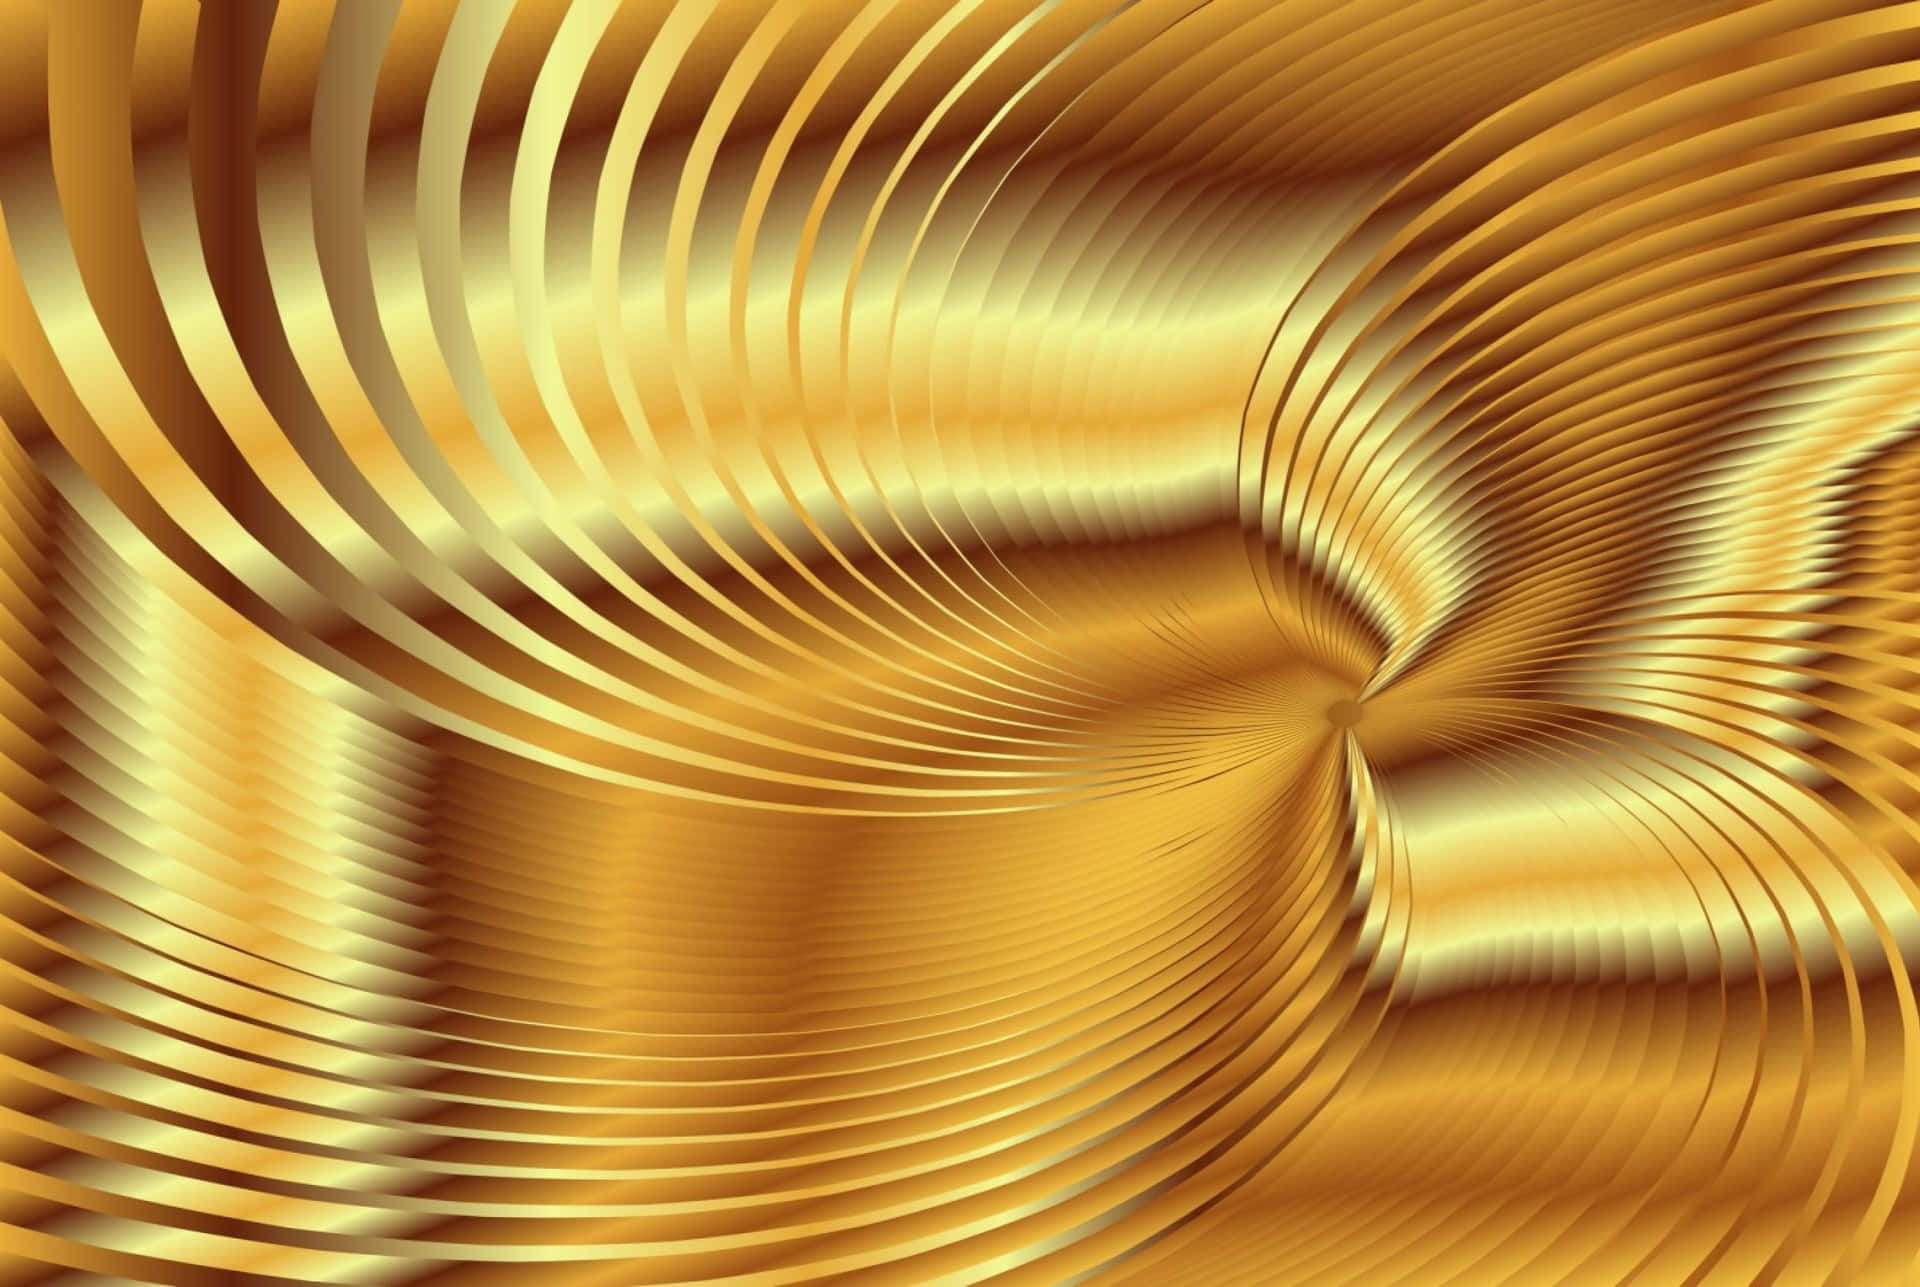 A Golden Background With A Wave Pattern